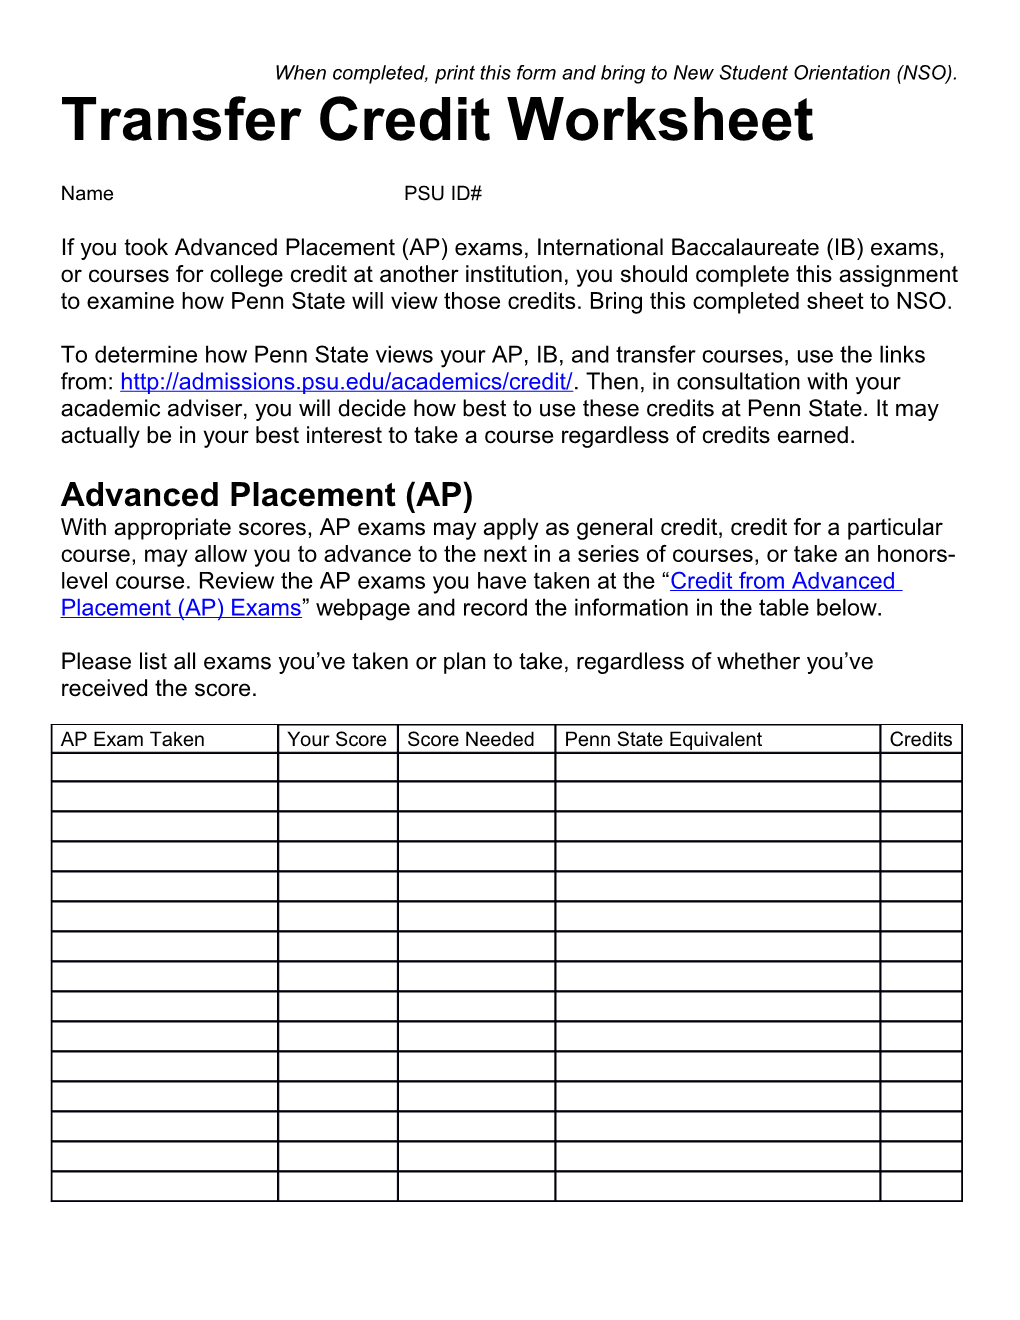 When Completed, Print This Form and Bring to Your FTCAP Advising Day